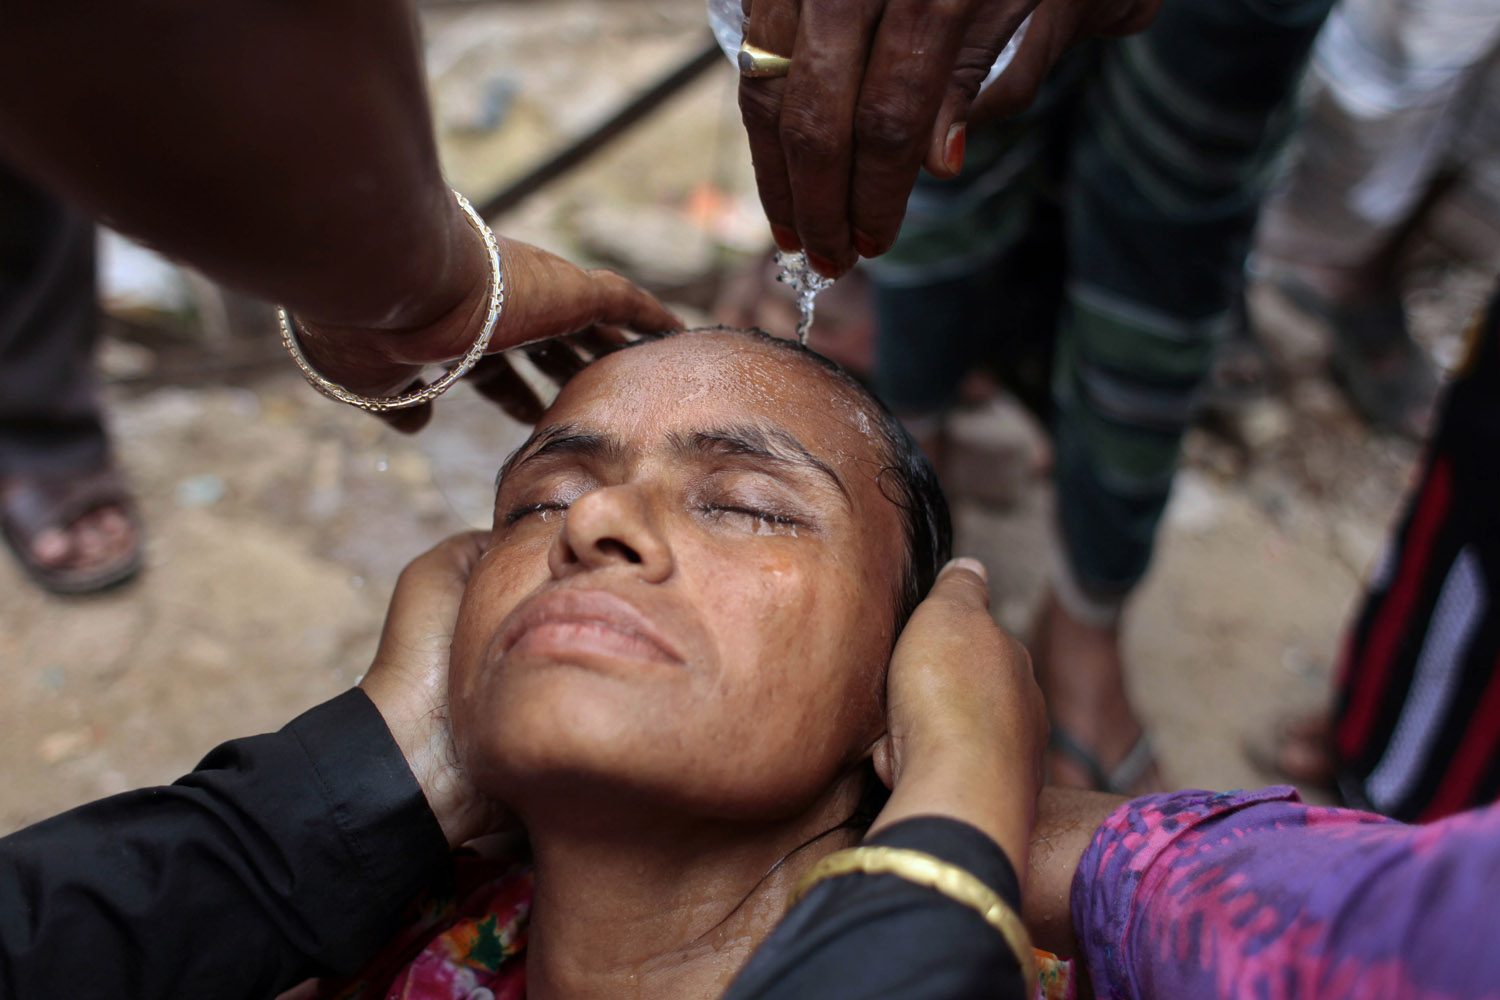 June 24, 2013. Shahida Begum losses consciousness during a protest to demand compensation for the dead and missing workers of a garment factory building collapse, in Savar, near Dhaka, Bangladesh.